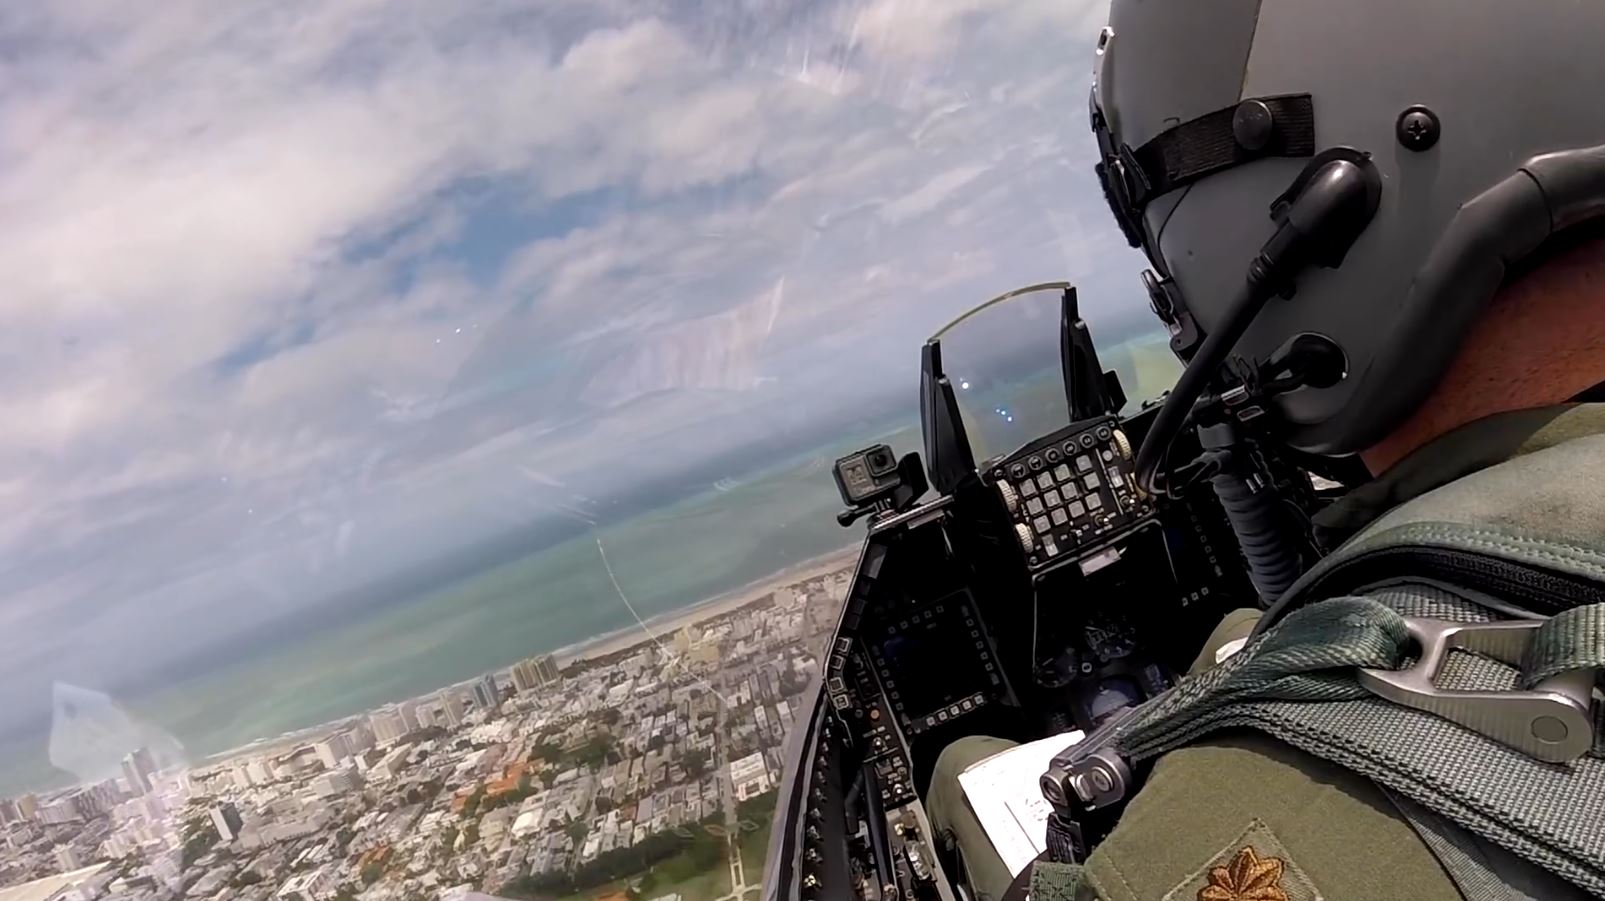 F-16 Over the Shoulder Cockpit View - Airshow over South Beach Miami - Cockpit Audio